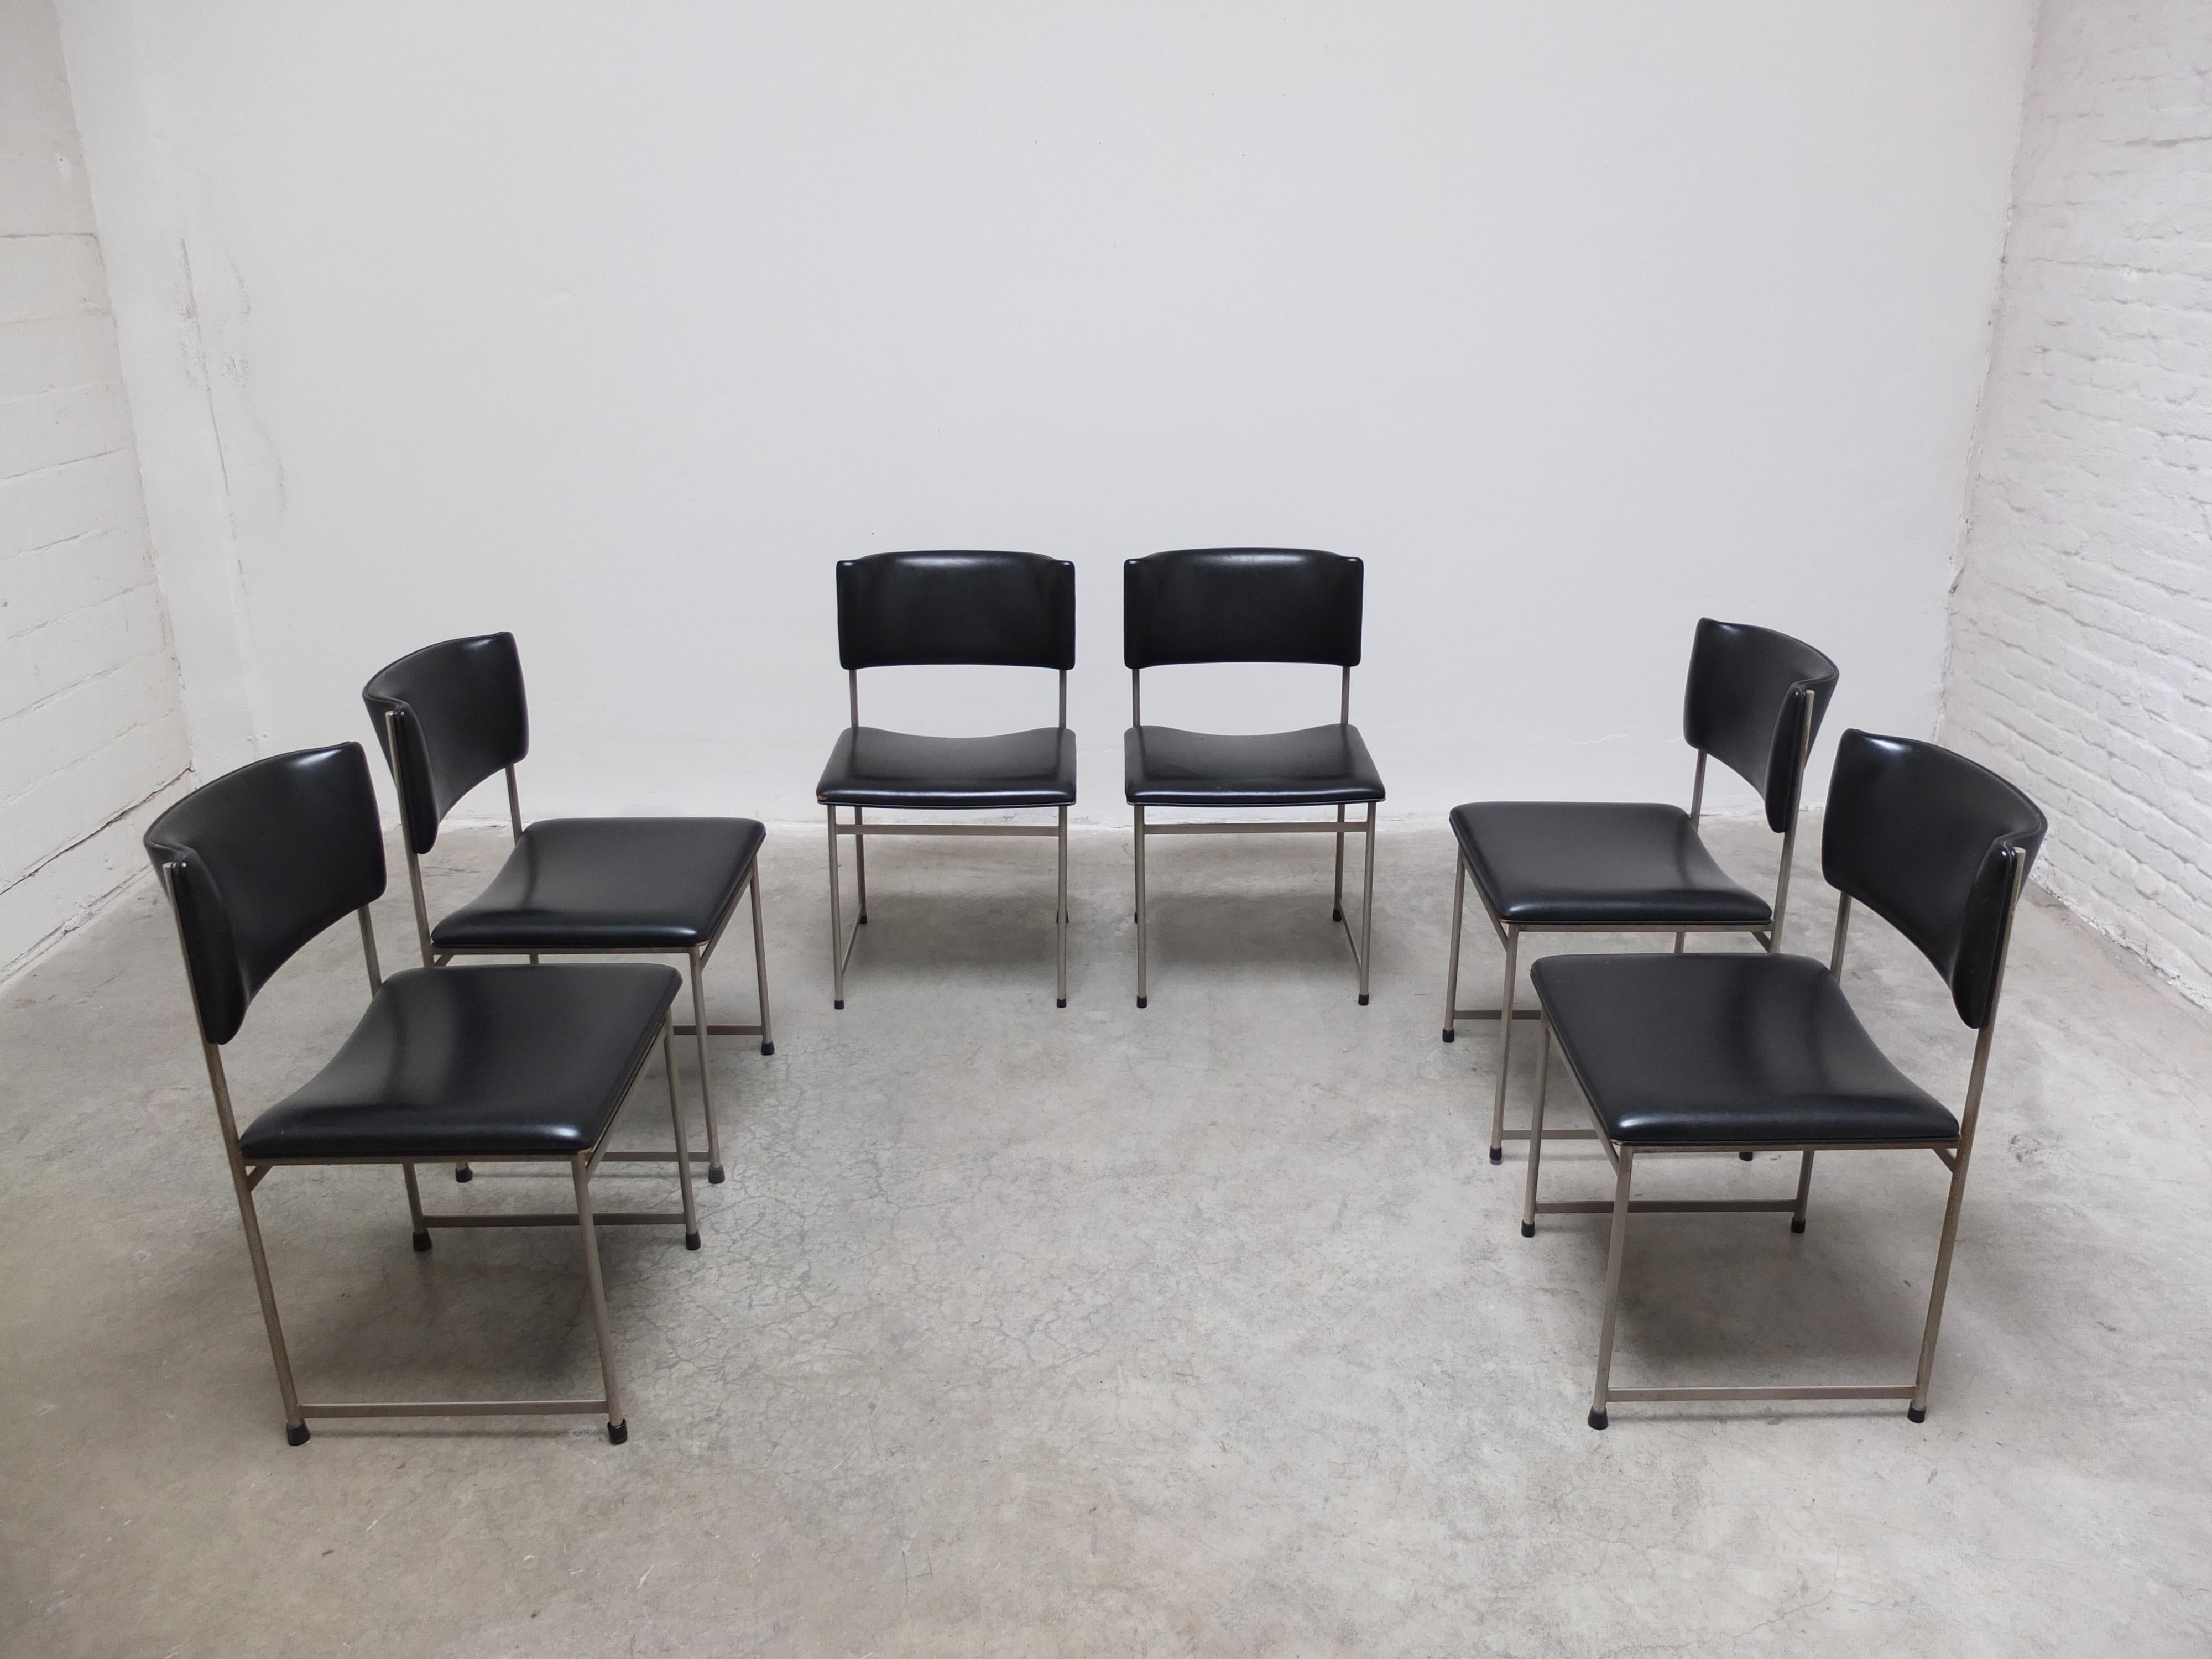 Dutch Set of 6 ‘SM08’ Dining Chairs by Cees Braakman for Pastoe, 1960s For Sale